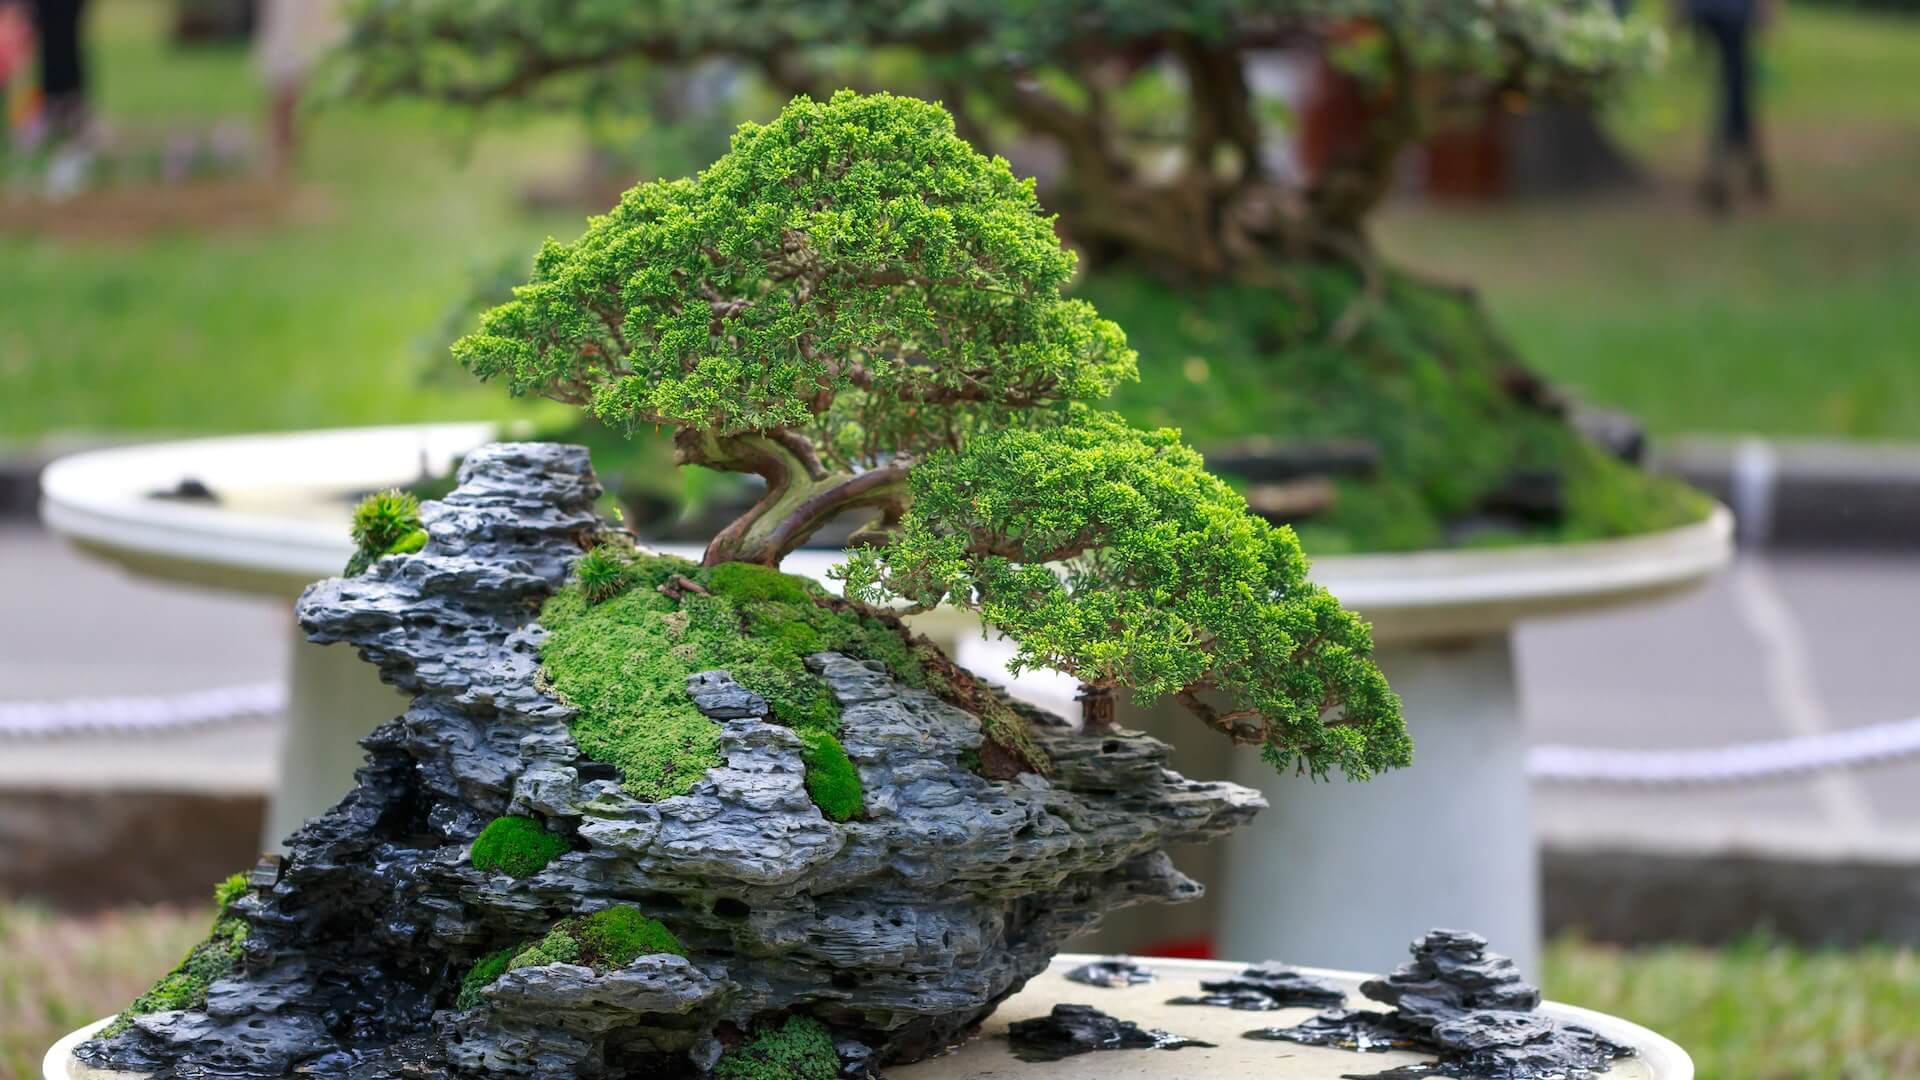 The Art Of Bonsai: Cultivating Tranquility In Miniature